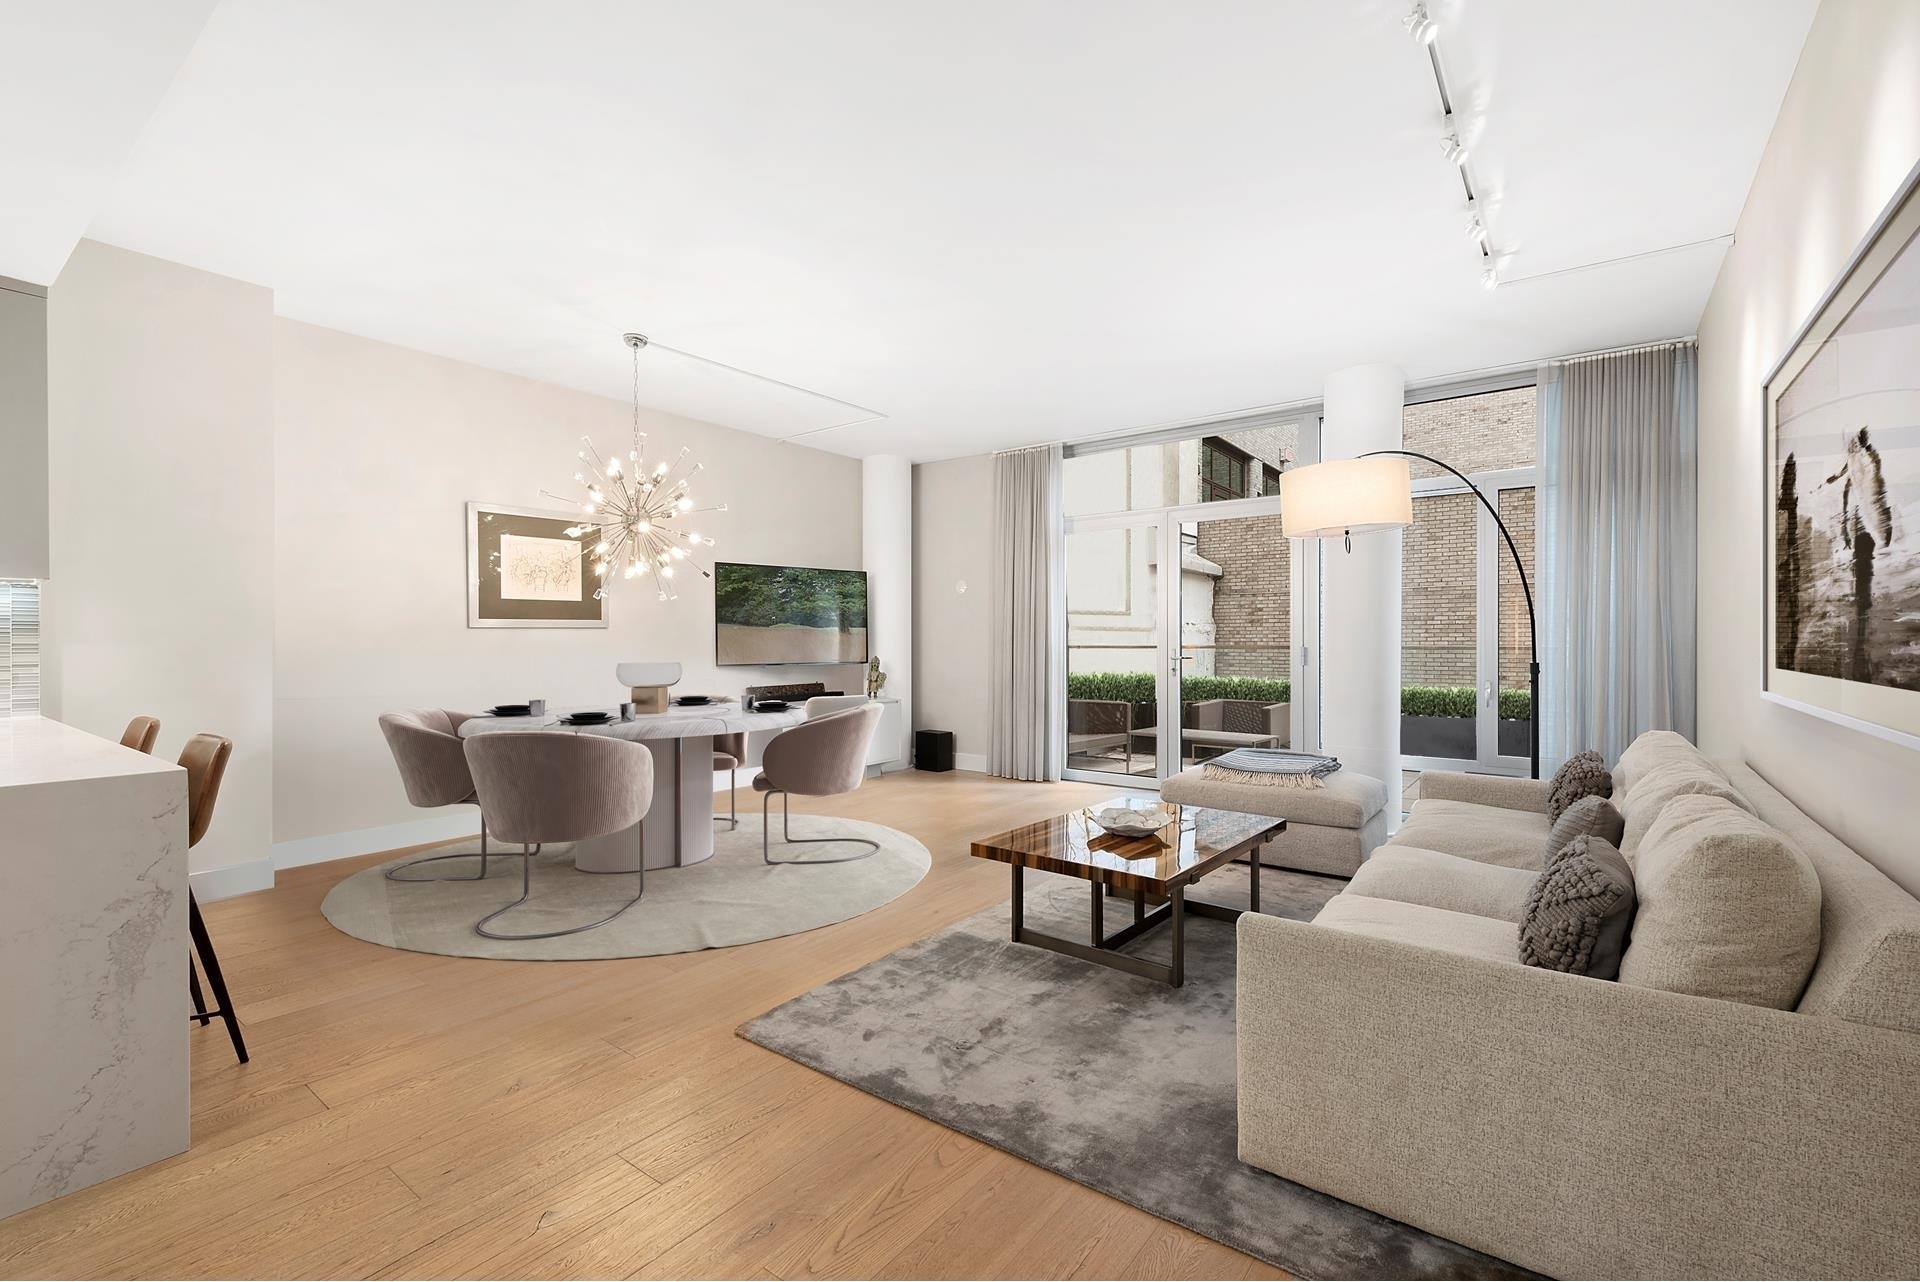 Condominium for Sale at 520 WEST CHELSEA, 520 W 19TH ST, 2C Chelsea, New York, NY 10011